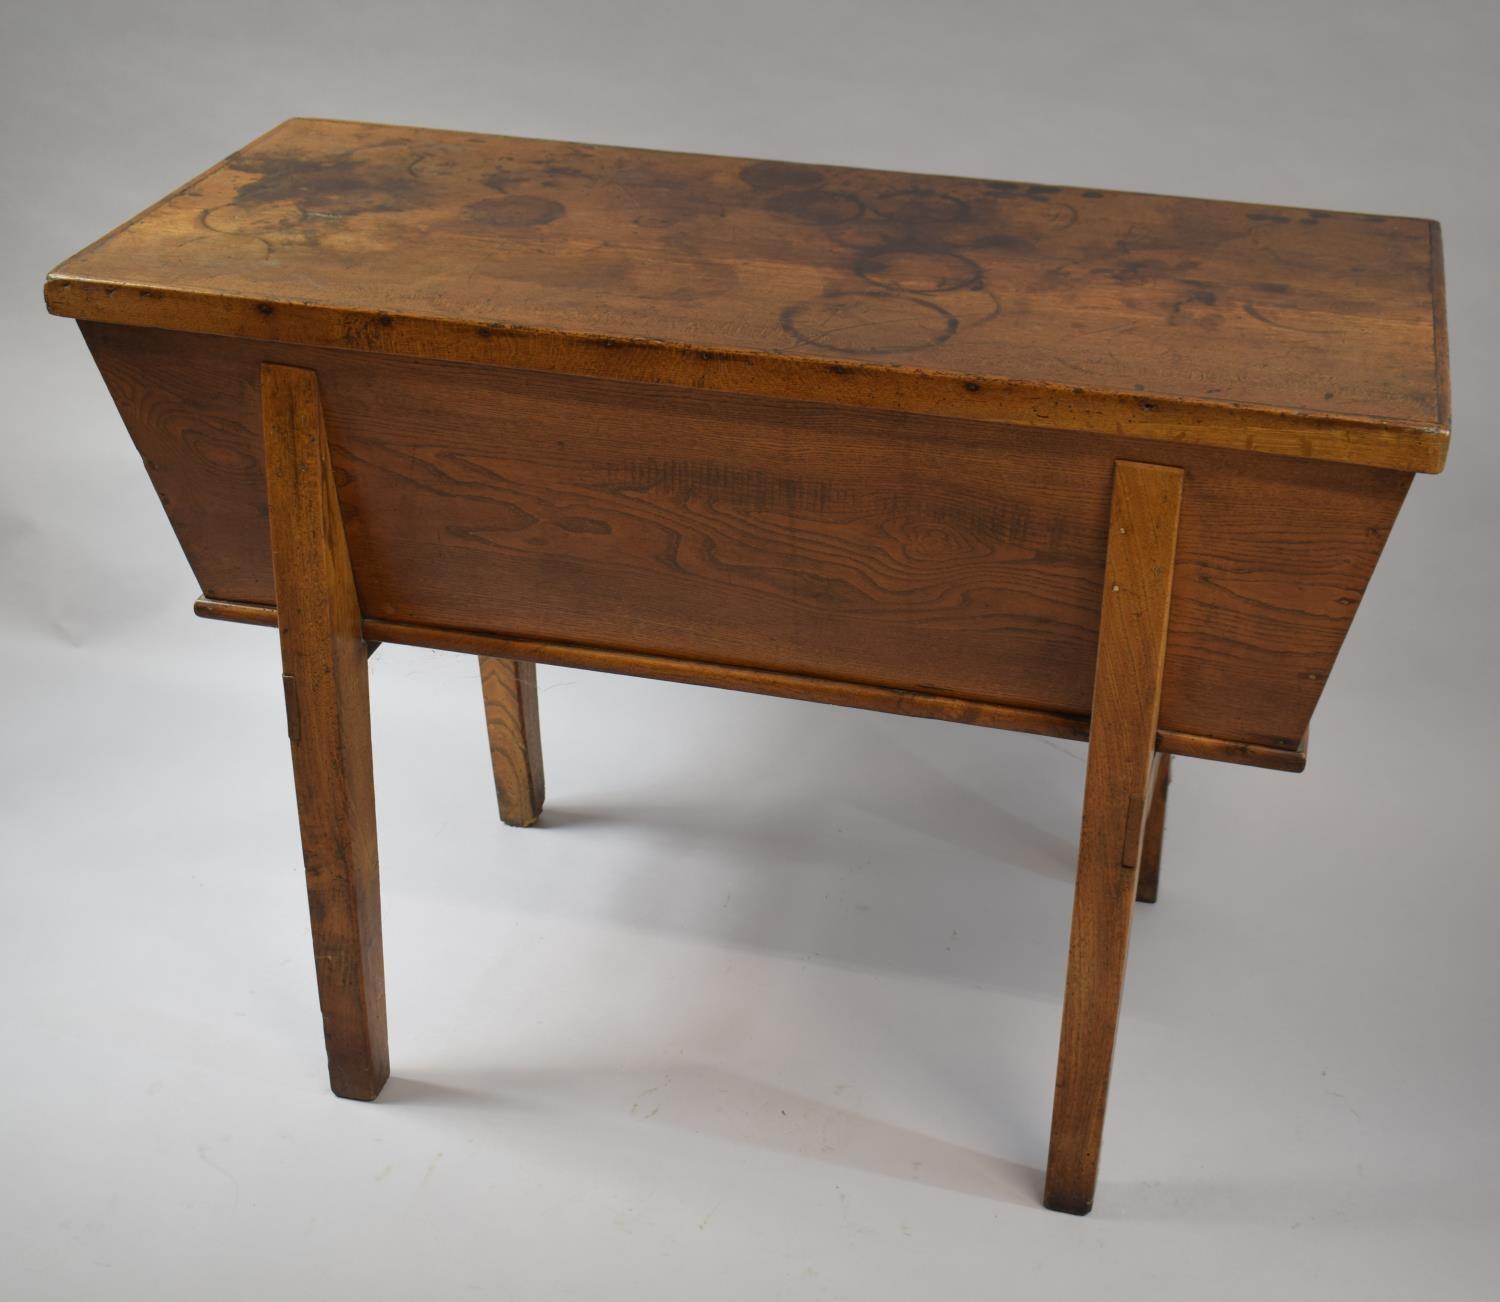 A 19th Century Country Elm Dough Bin with Lift Off Lid (Has Been Treated for Worm), 103.5 x 43cms - Image 2 of 5